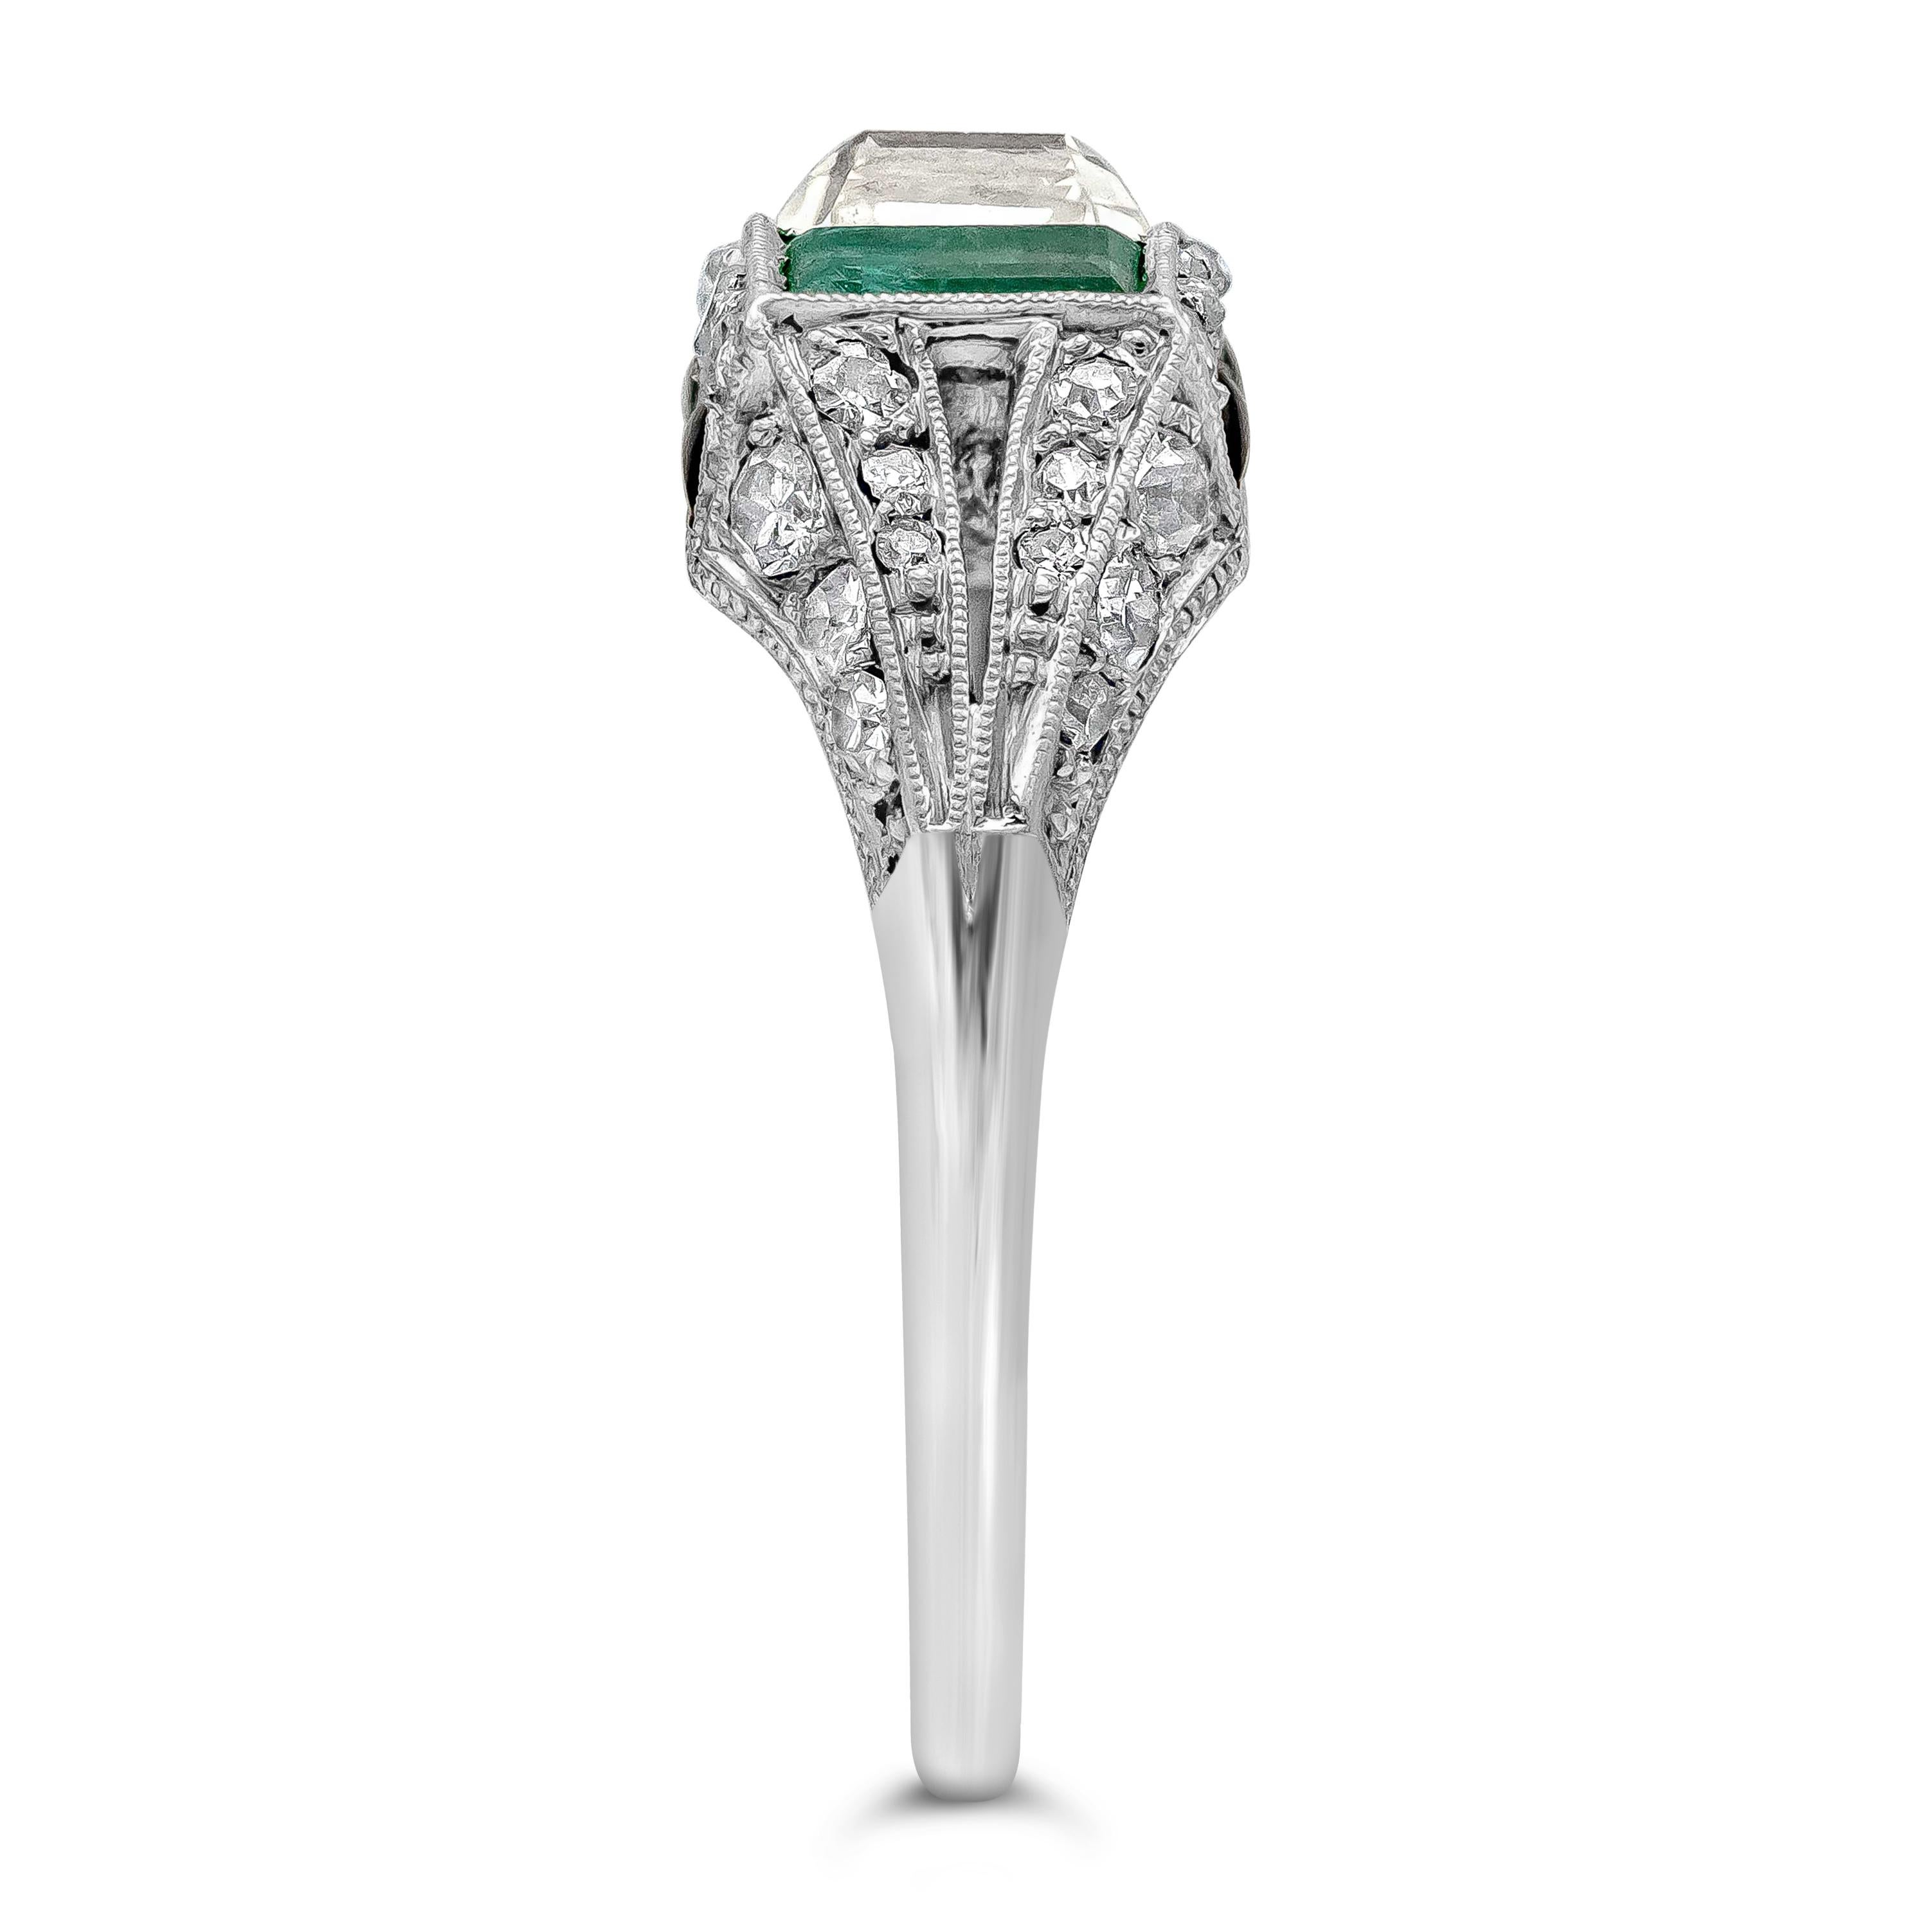 1.00 Carats Asscher Cut Diamond, Emerald and Onyx Antique Engagement Ring For Sale 1